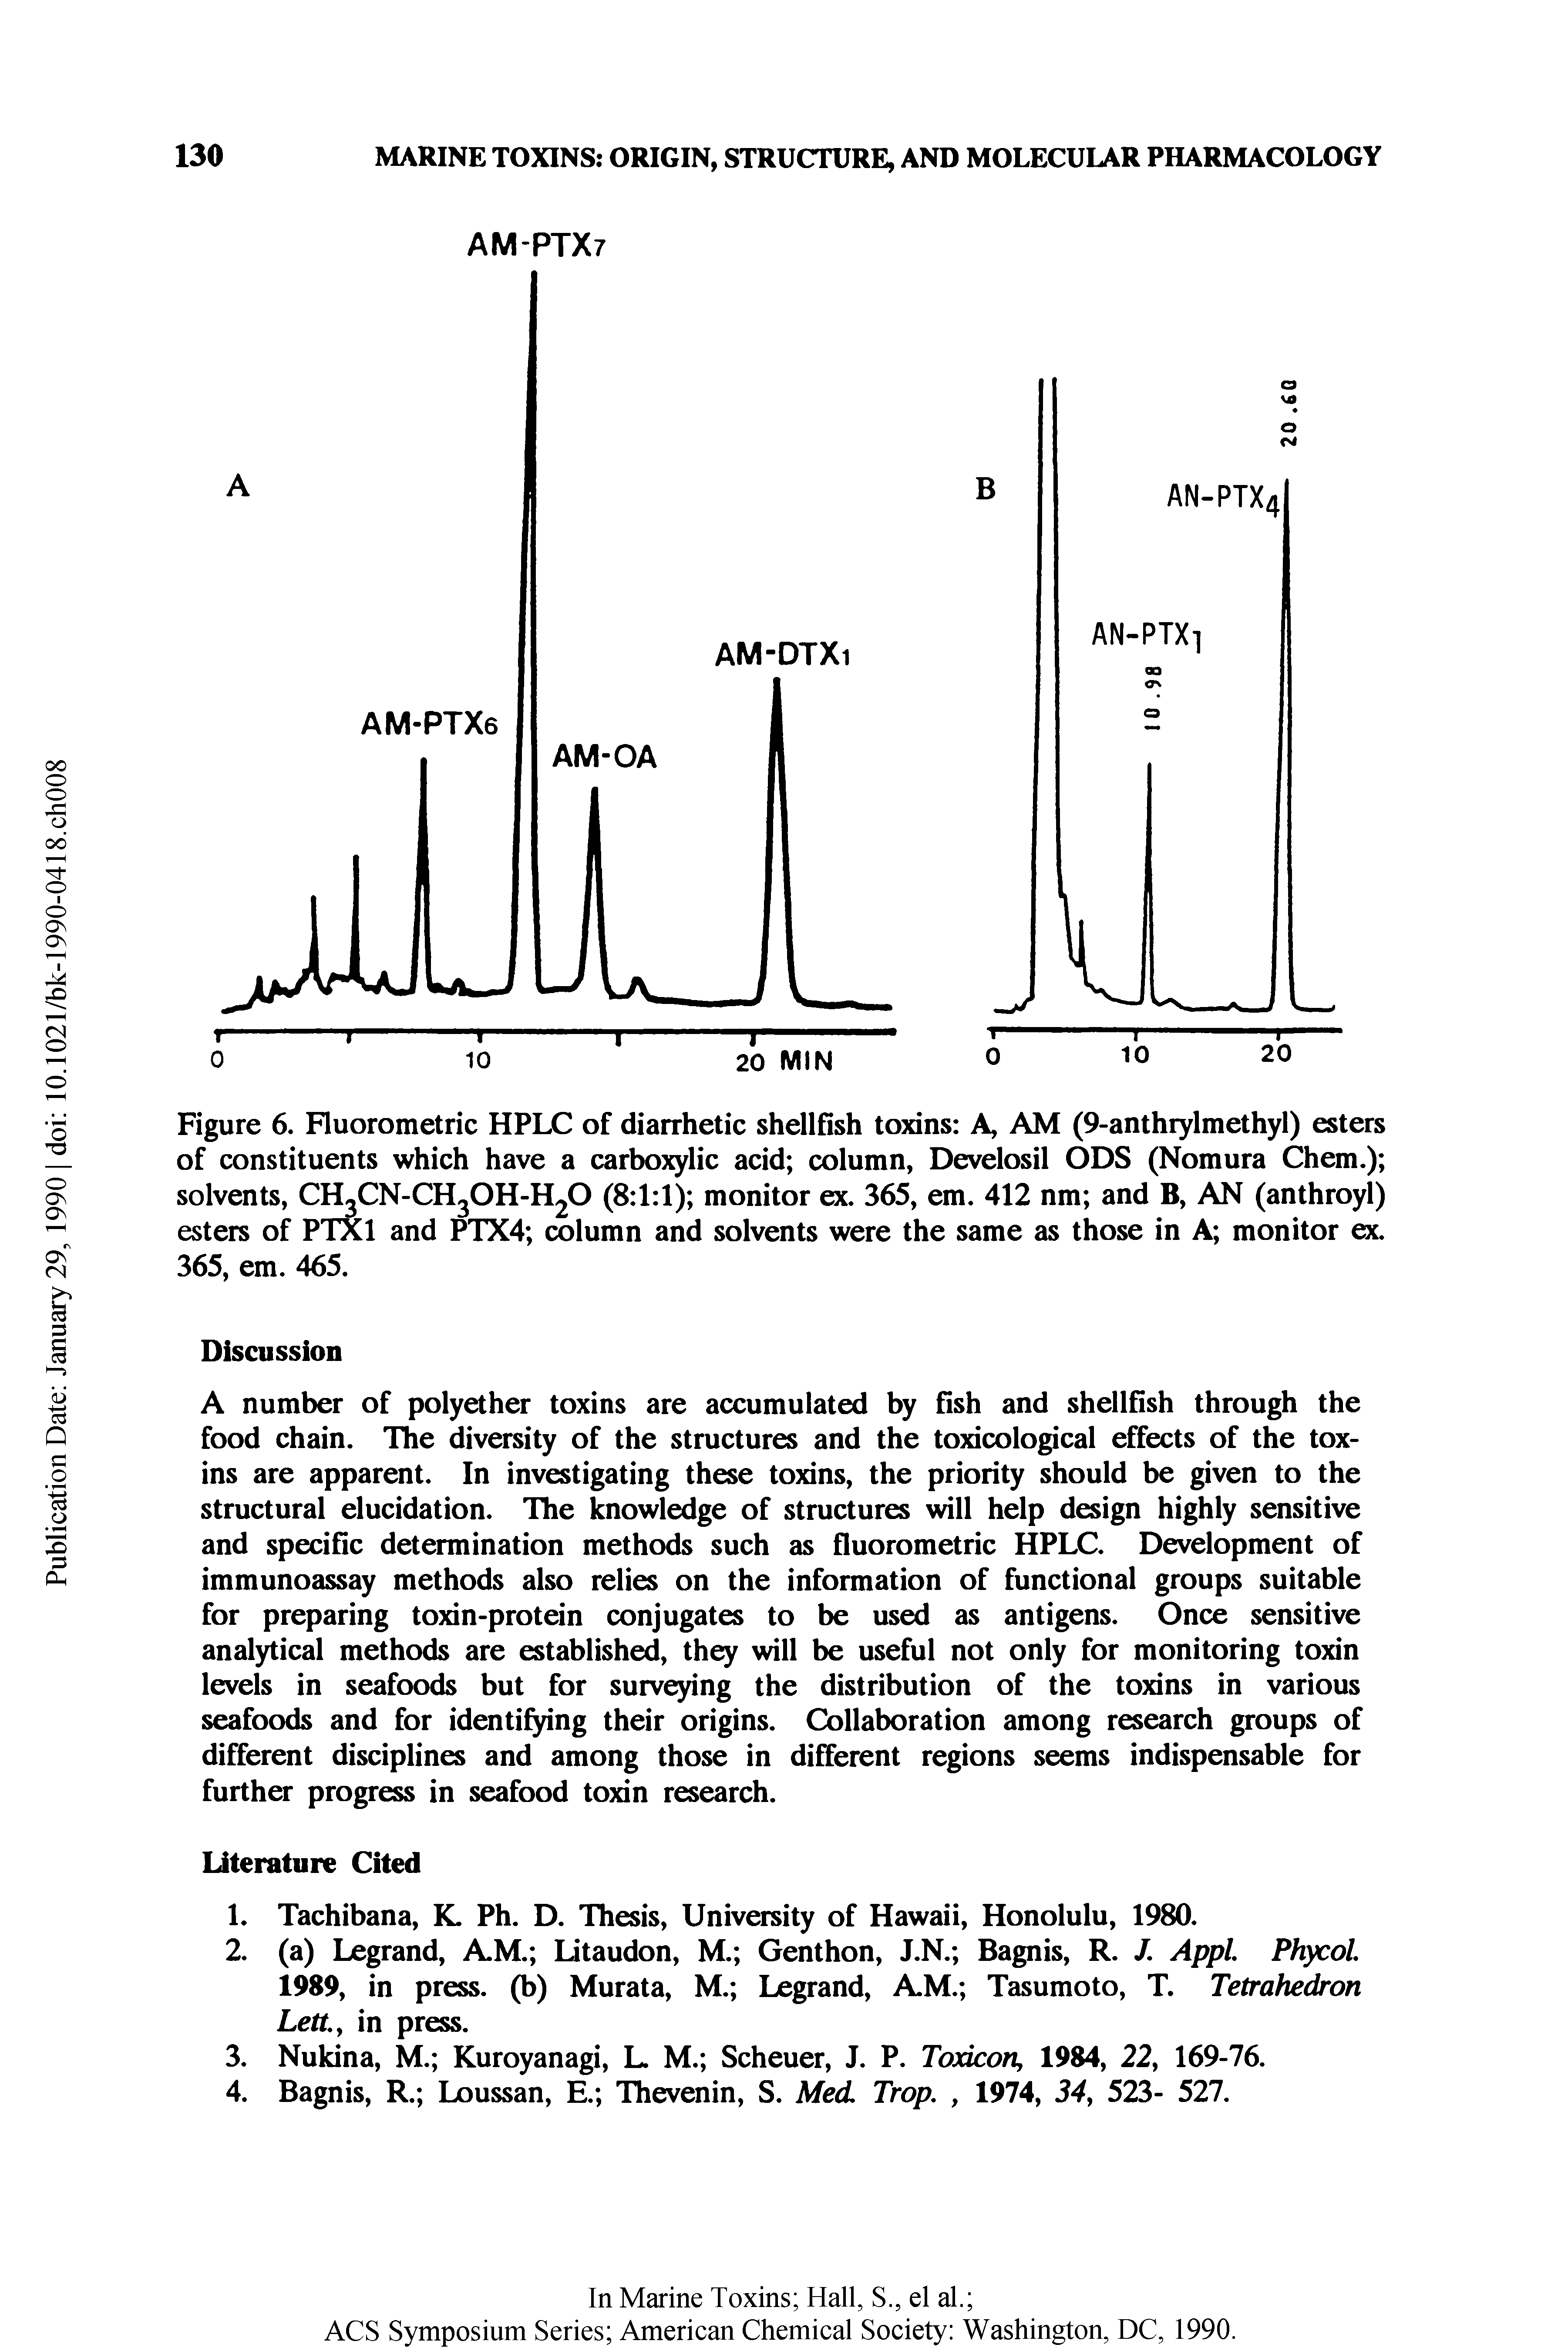 Figure 6. Fluorometric HPLC of diarrhetic shellfish toxins A, AM (9-anthrylmethyl) esters of constituents which have a carboxylic acid column, Develosil ODS (Nomura Chem.) solvents, CH3CN-CH3OH-H2O (8 1 1) monitor ex. 365, em. 412 nm and B, AN (anthroyl) esters of PTXl and PTX4 column and solvents were the same as those in A monitor x. 365, em. 465.